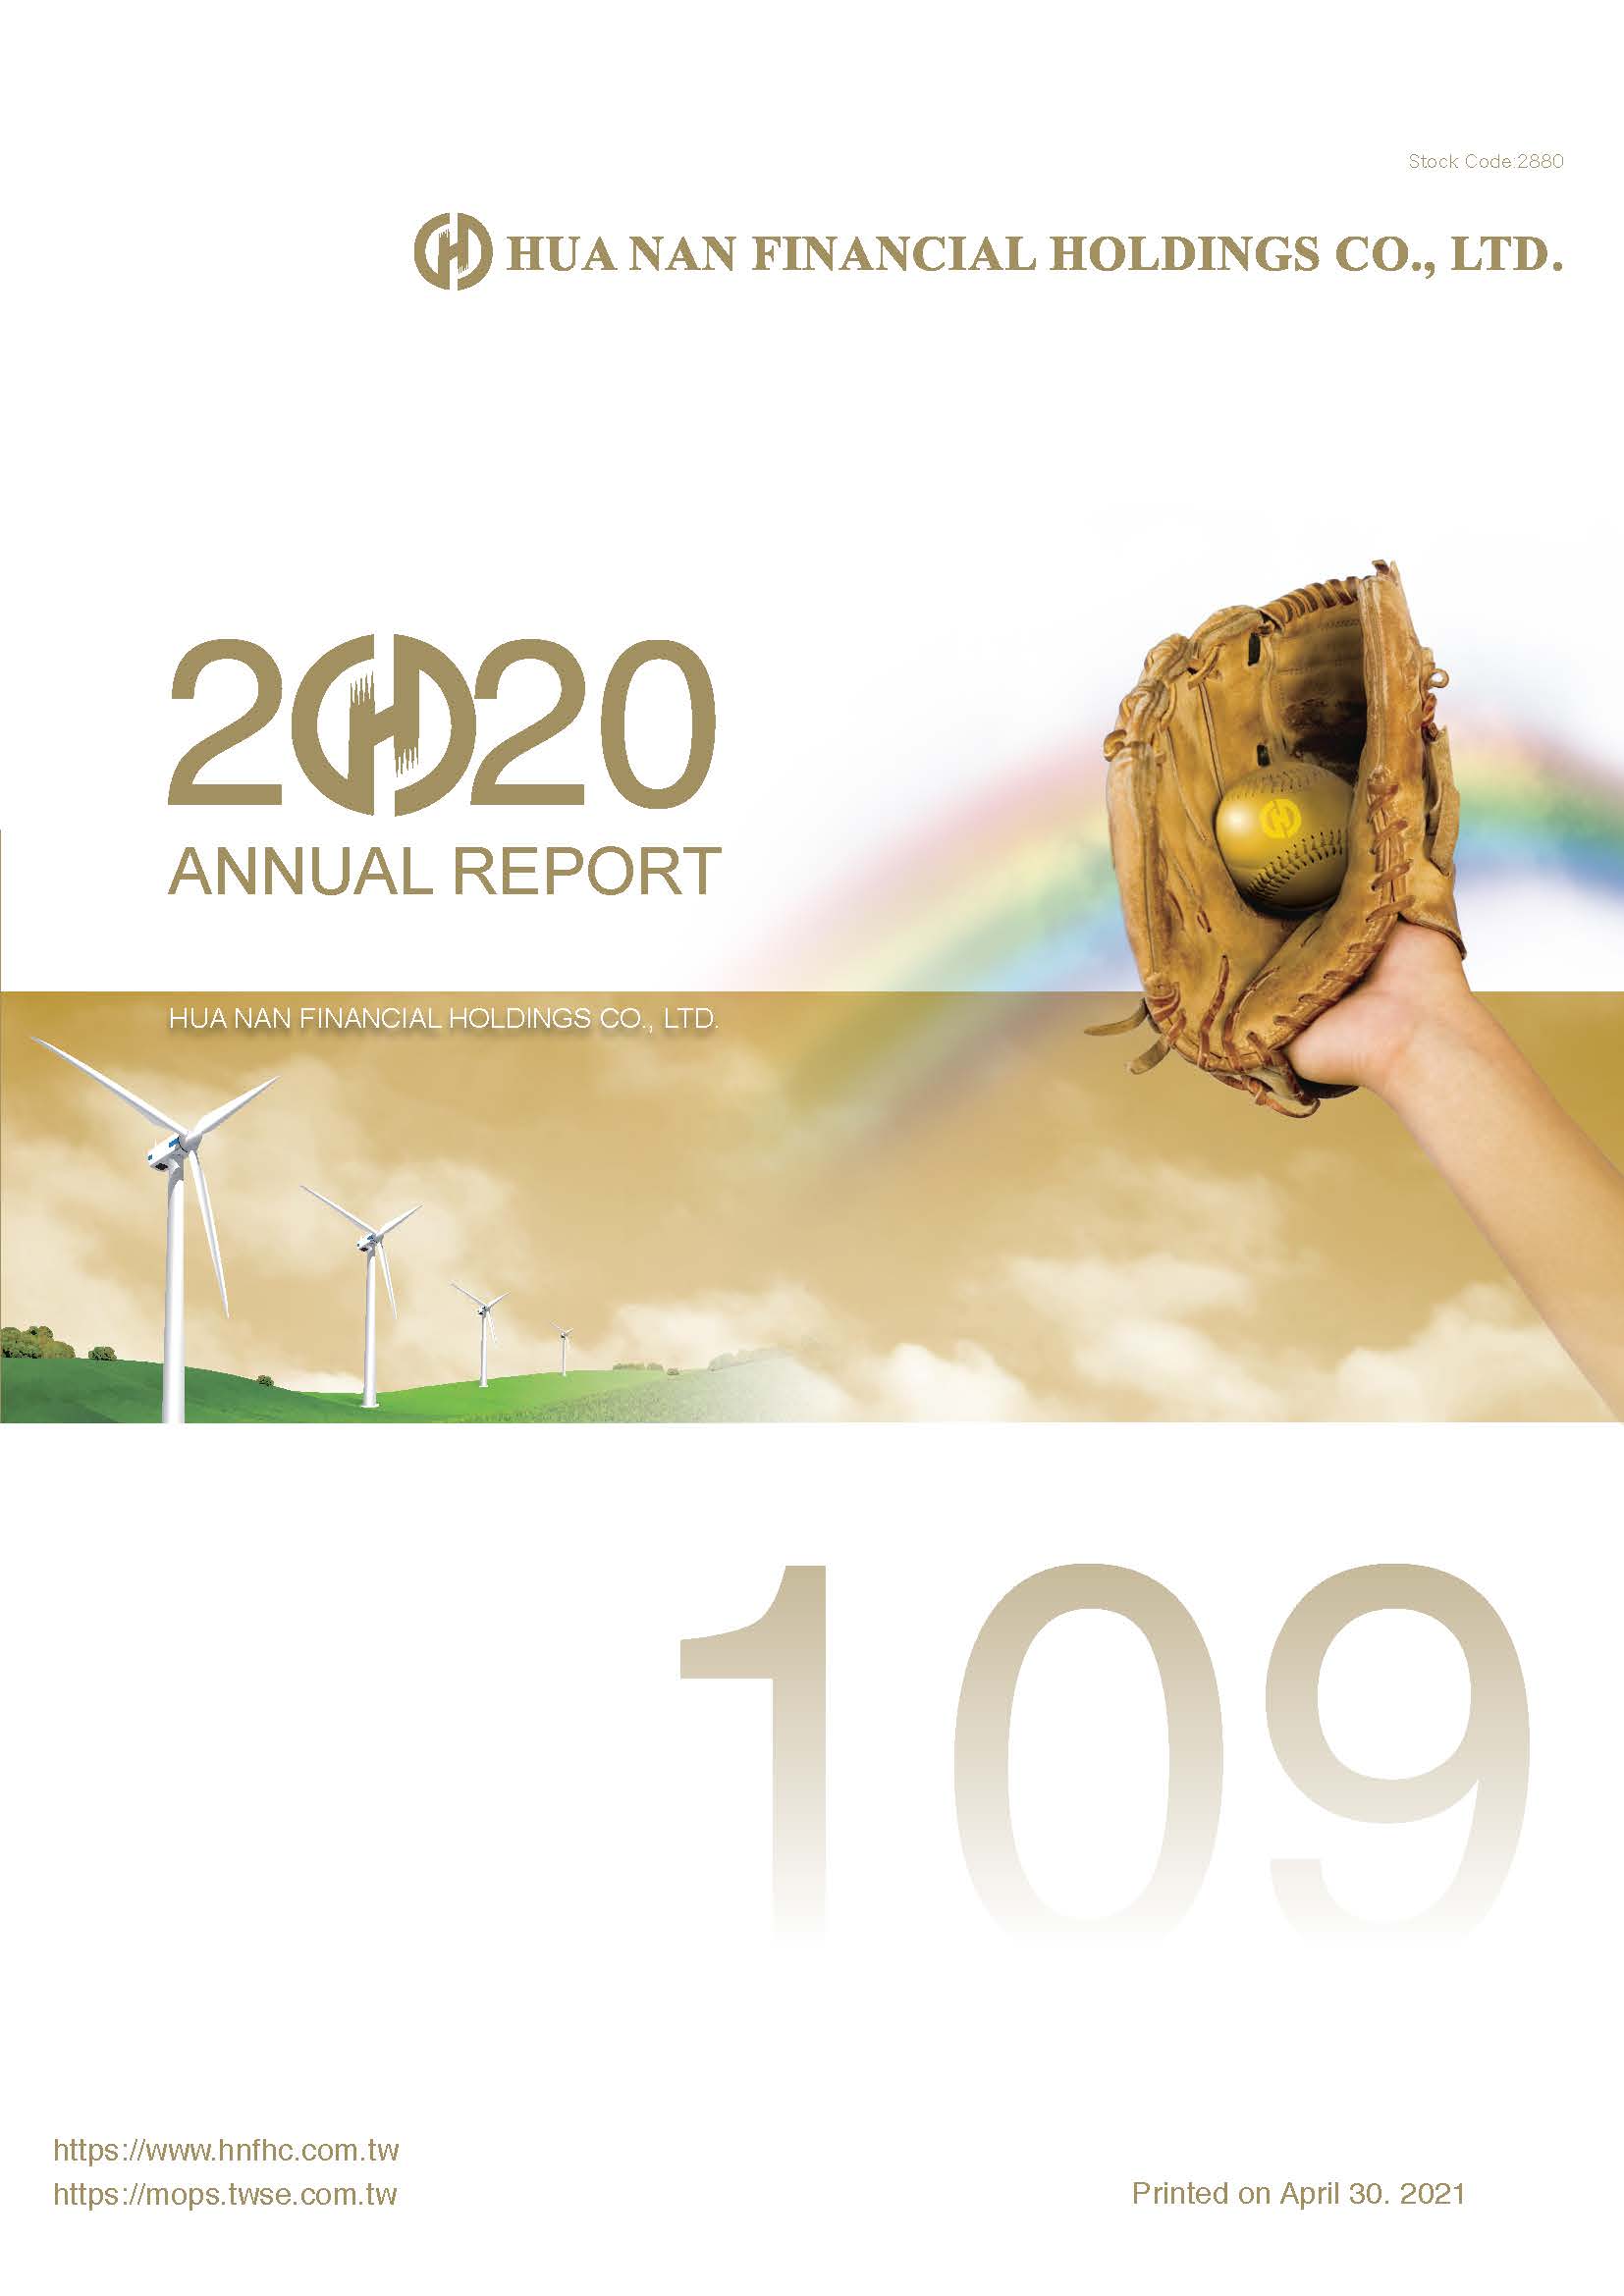 The cover of 2020 Annual Reports